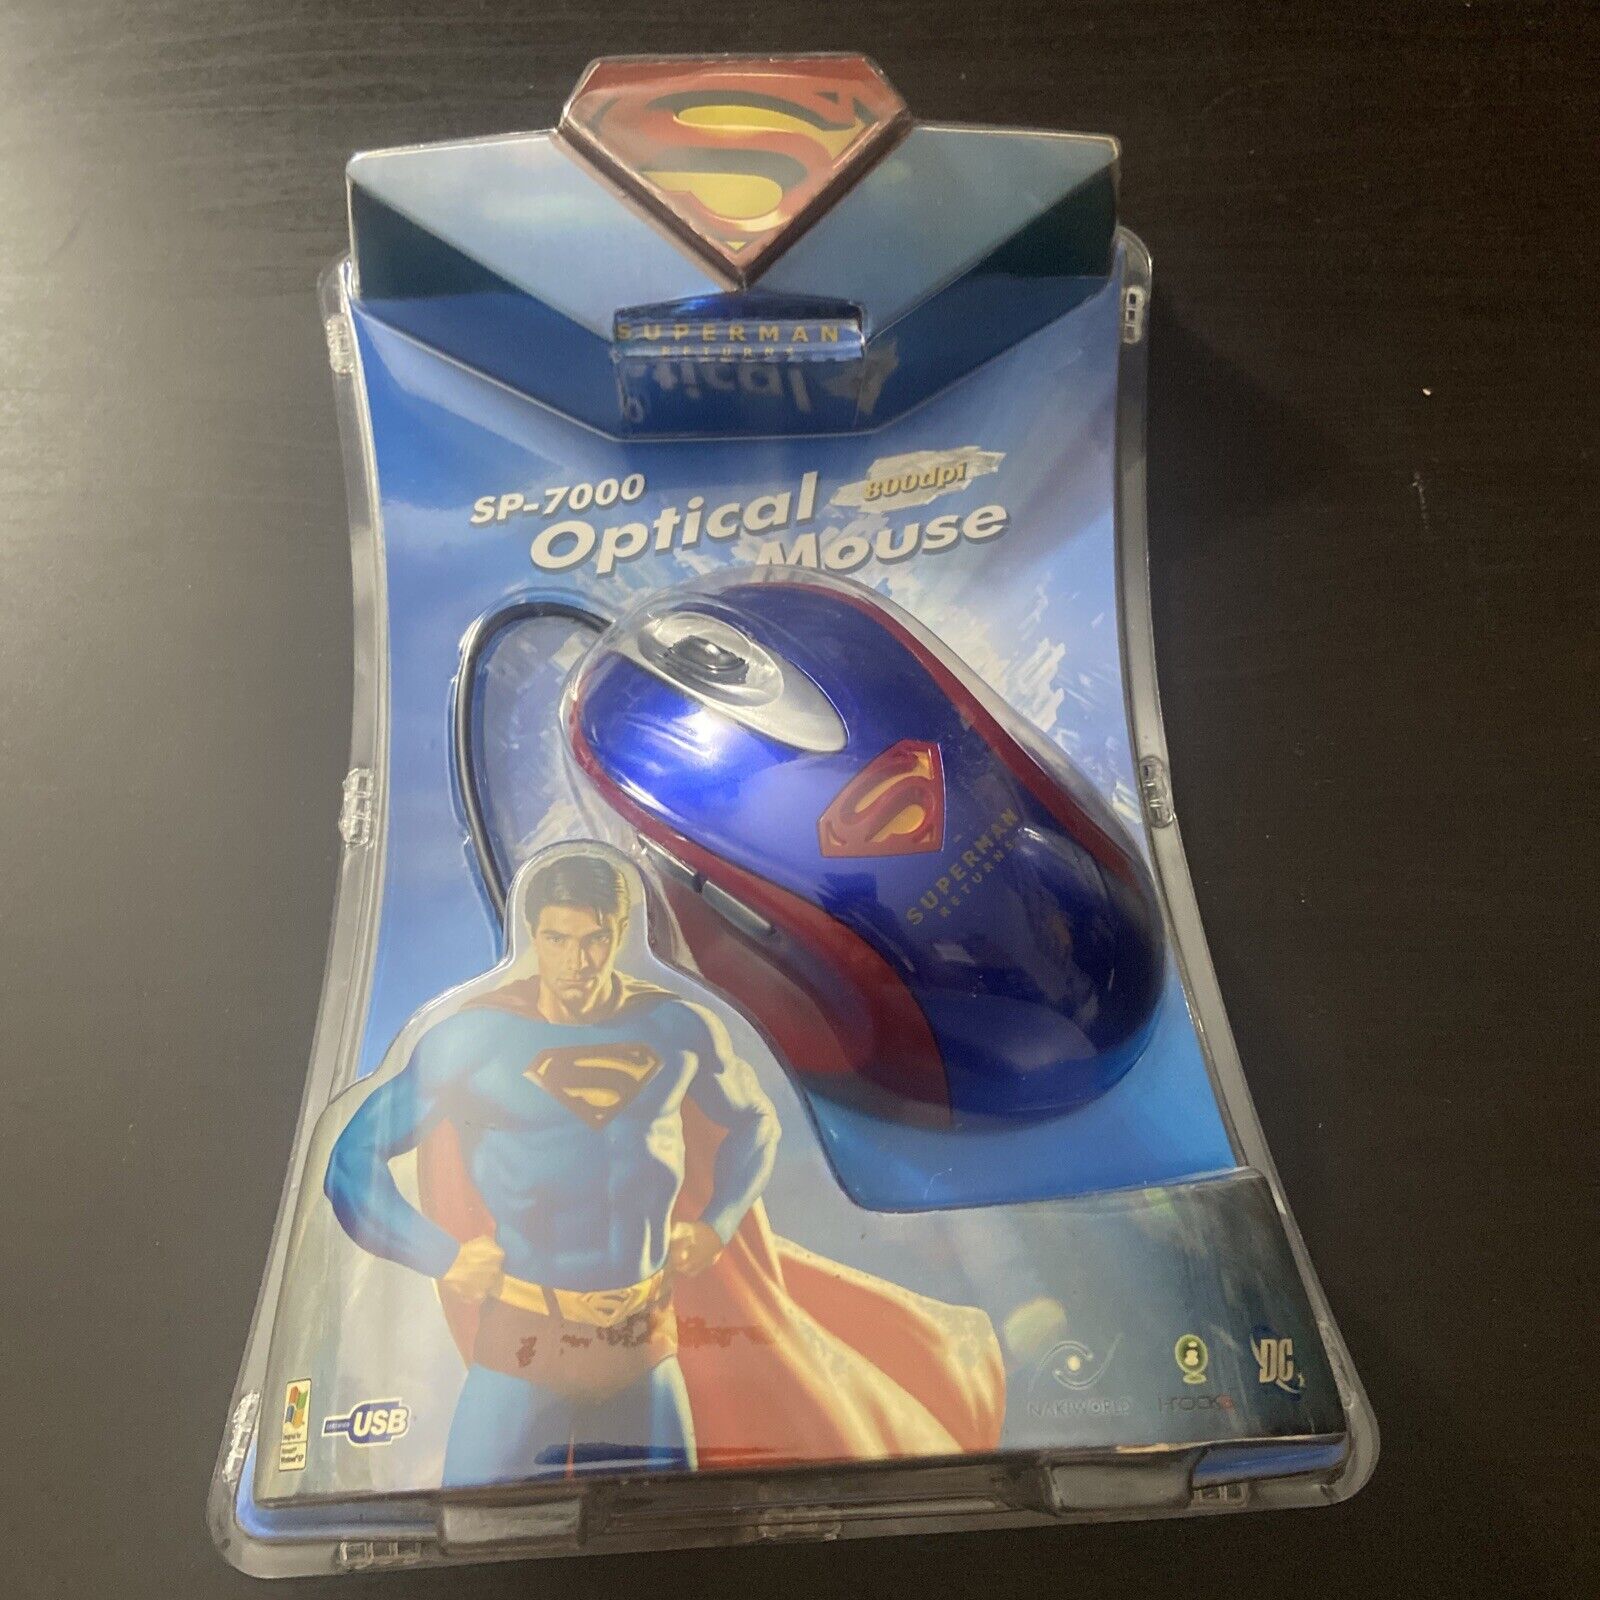 New SP-7000 DC Superman Returns Optical Wired Mouse 800dpi